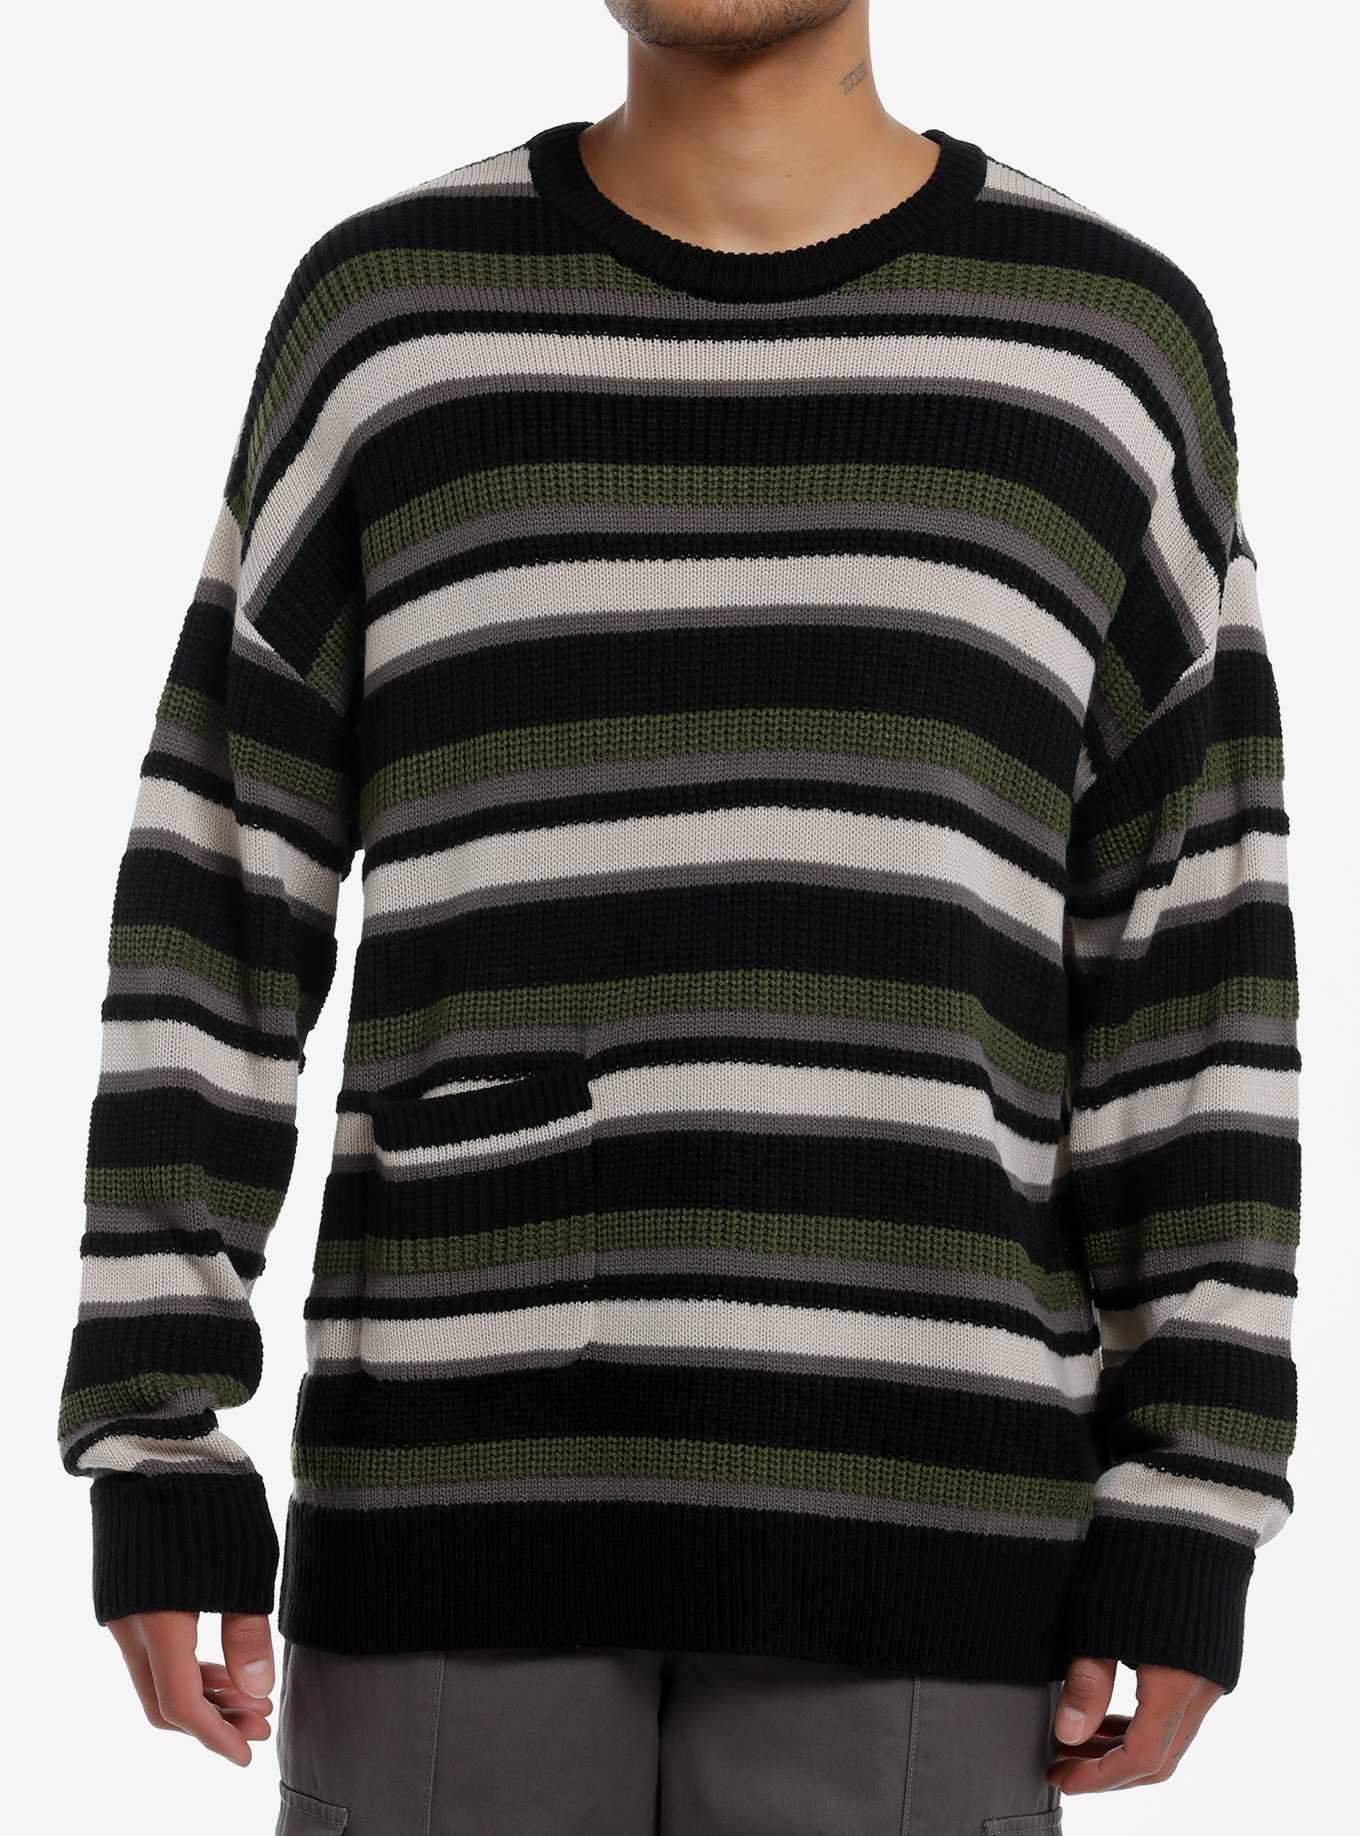 Thorn & Fable Green Black & White Stripe Knit Sweater, , hi-res